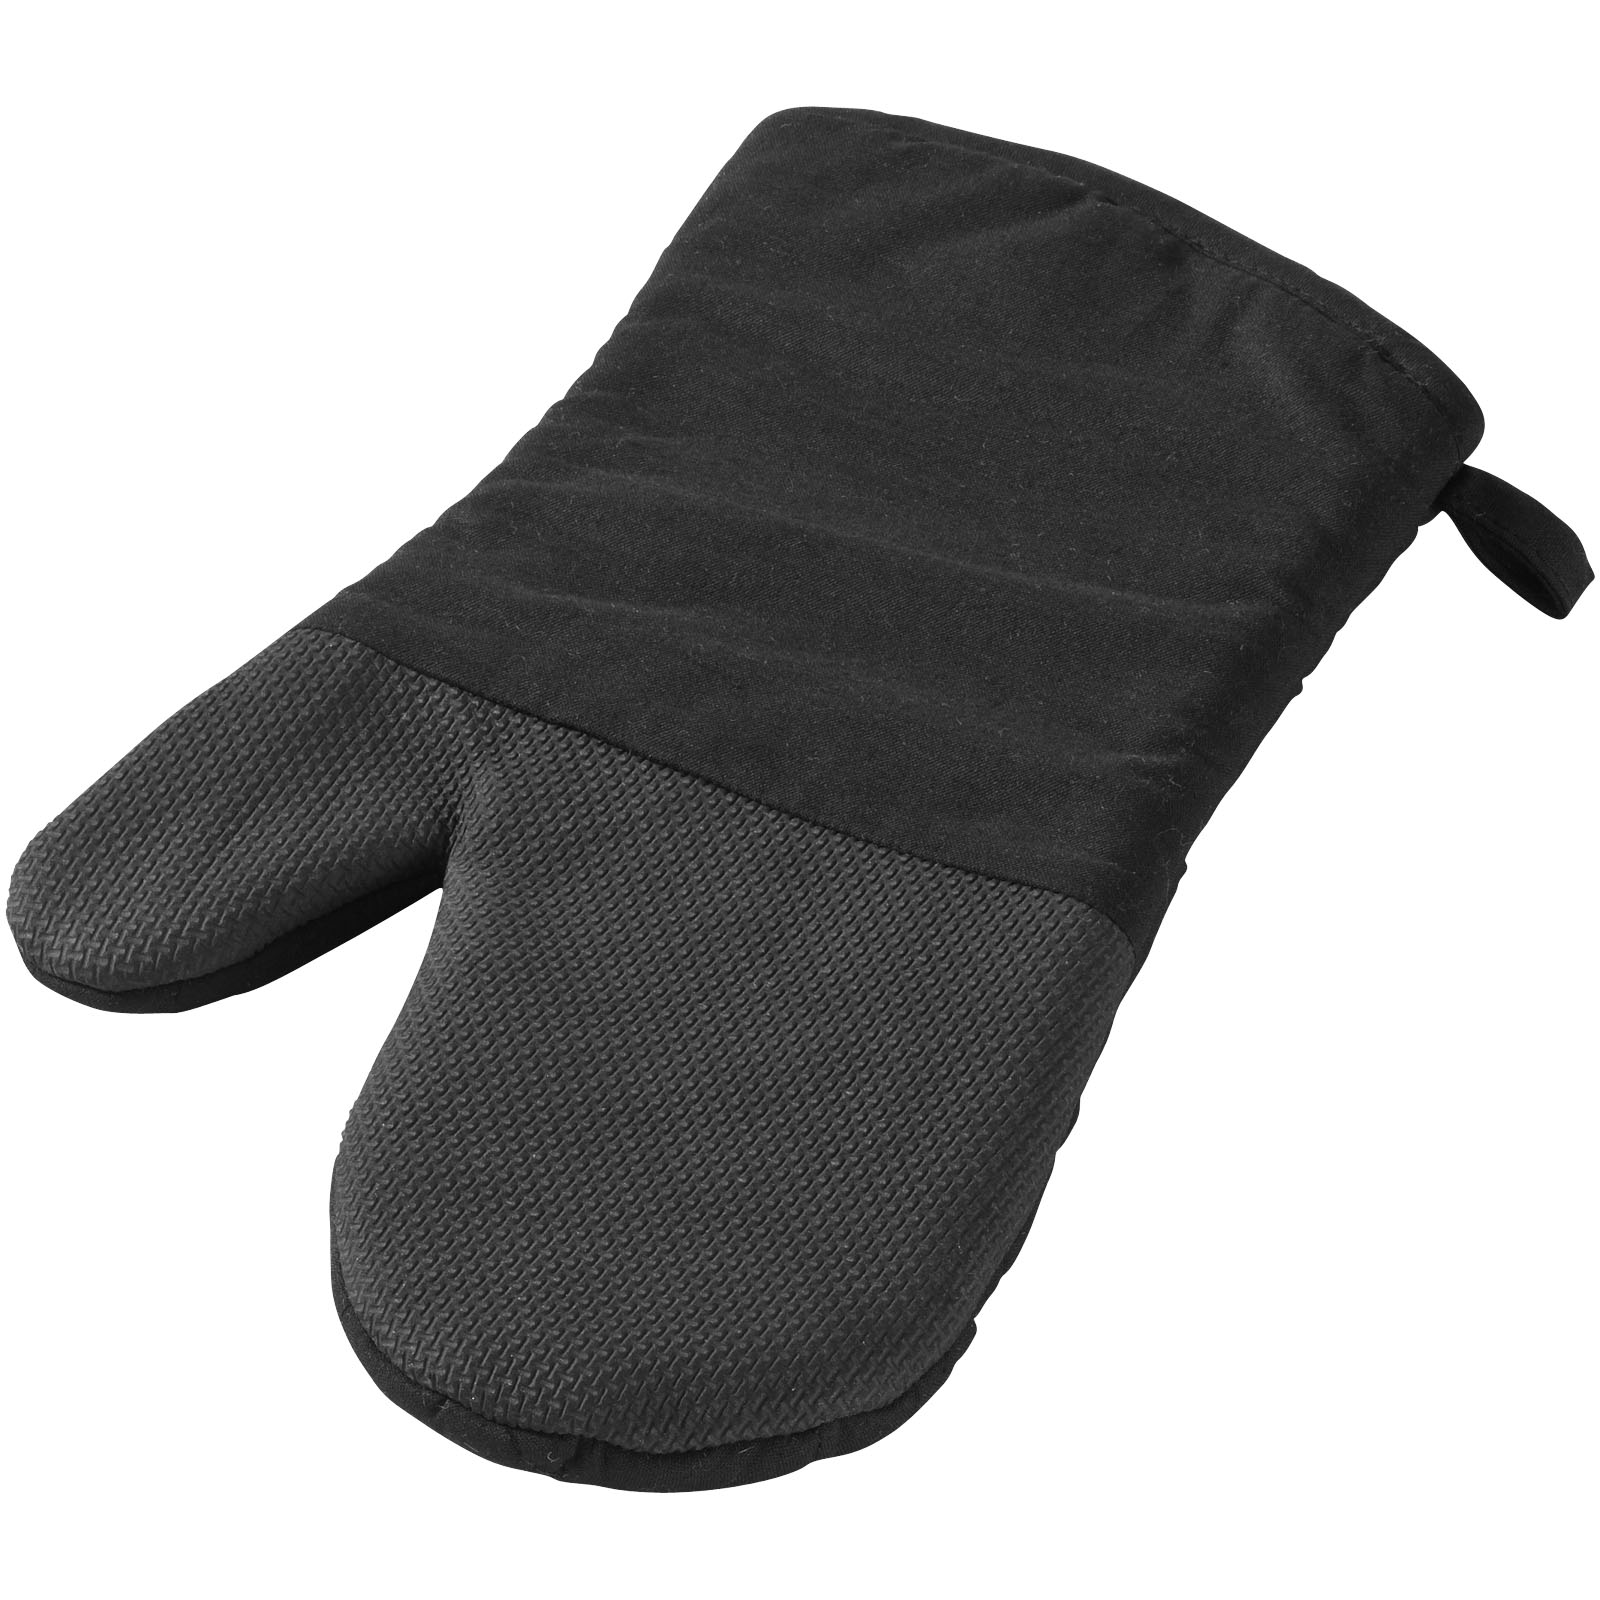 Advertising Kitchen Linen - Maya oven gloves with silicone grip